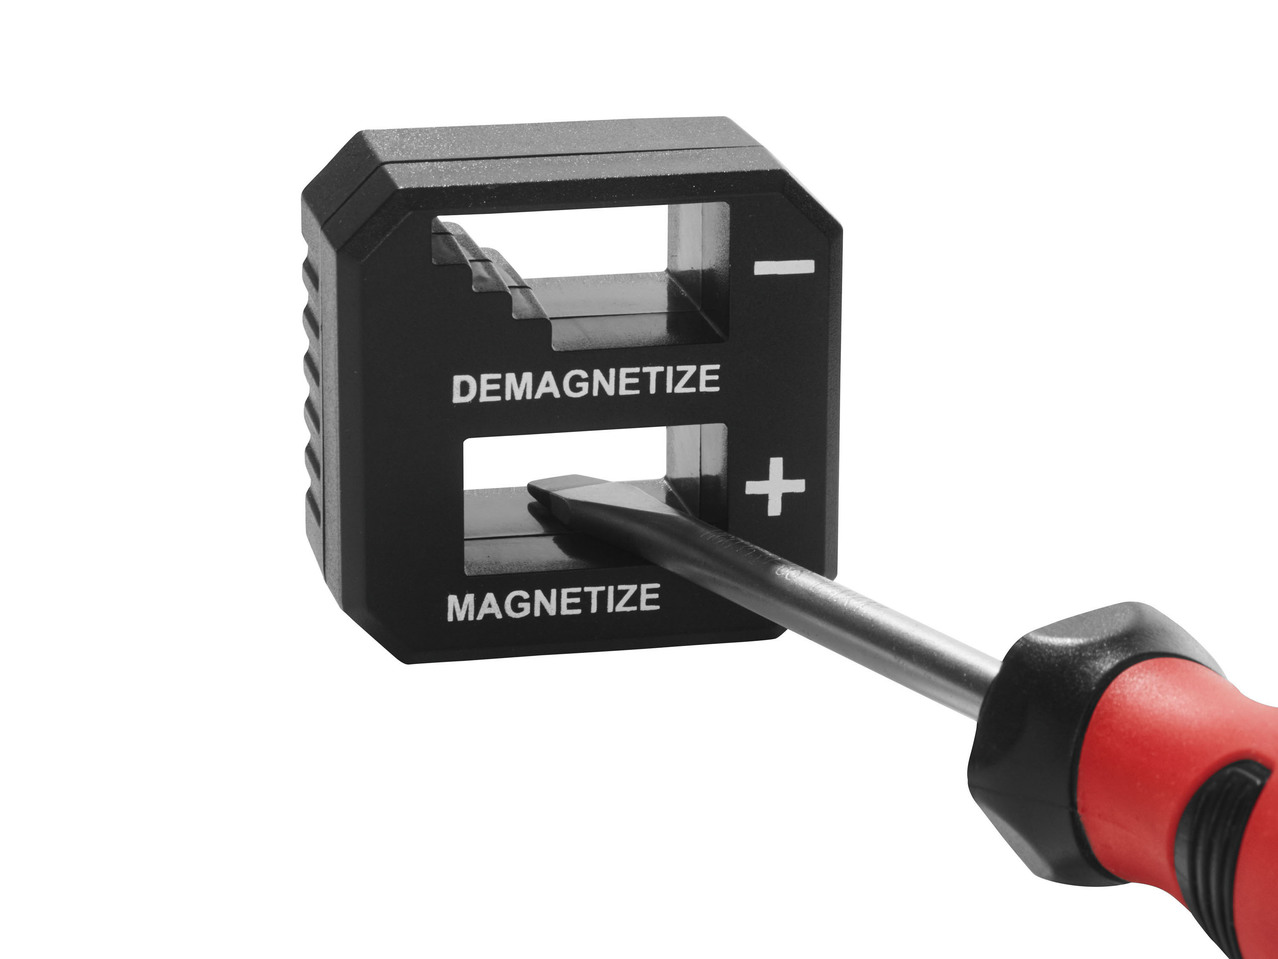 Magnetic Work Articles